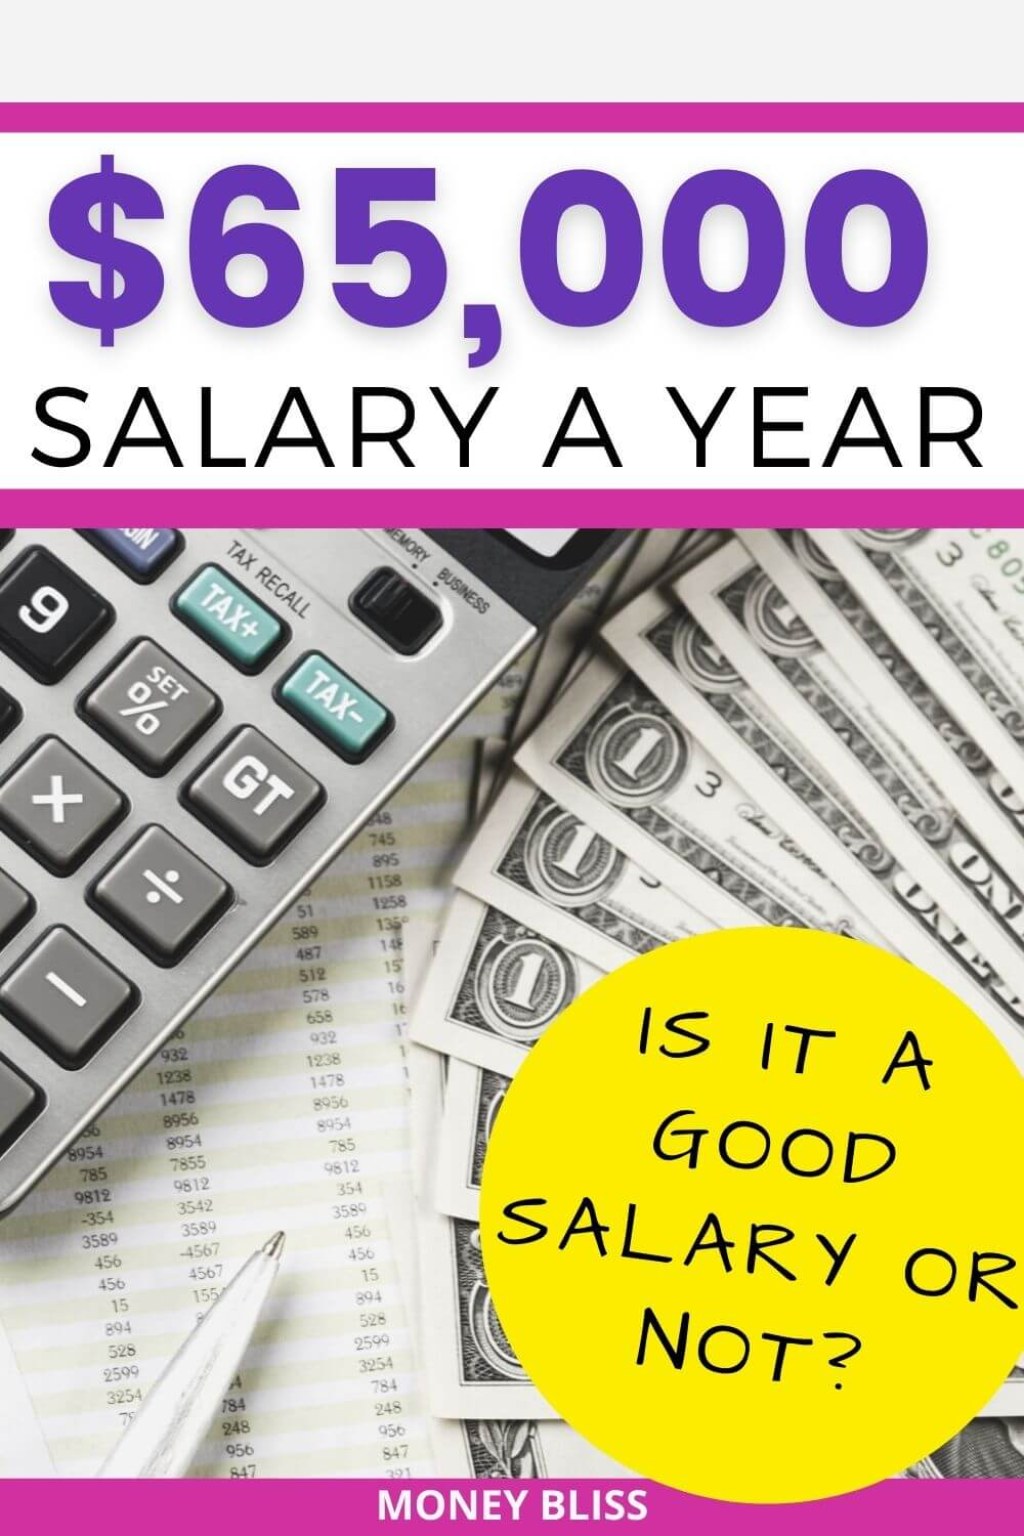 a year is how much an hour good salary or no money bliss 2